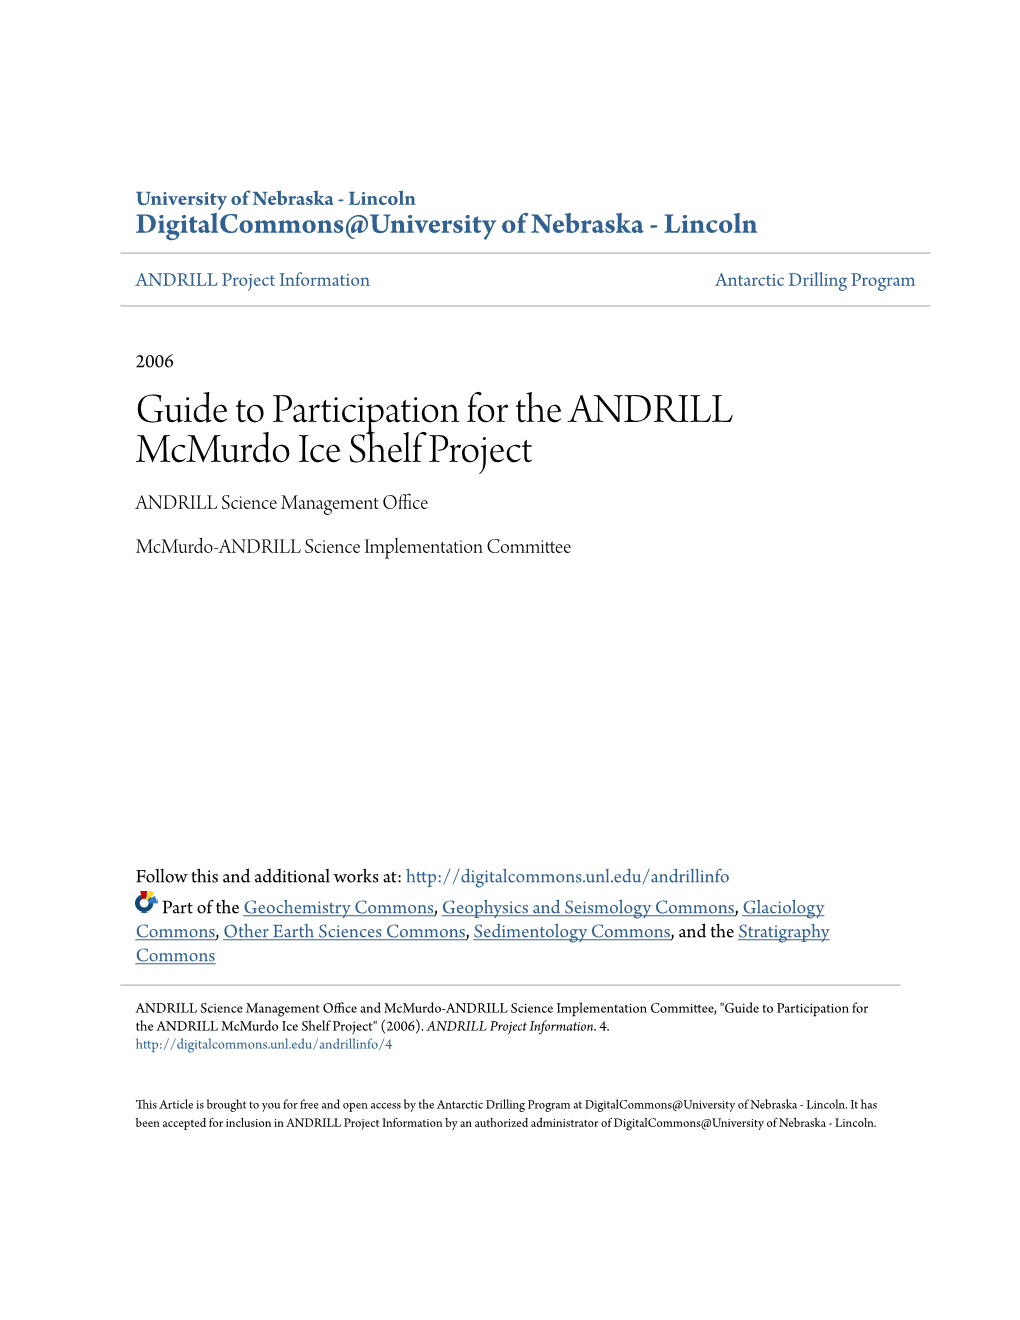 Guide to Participation for the ANDRILL Mcmurdo Ice Shelf Project ANDRILL Science Management Office